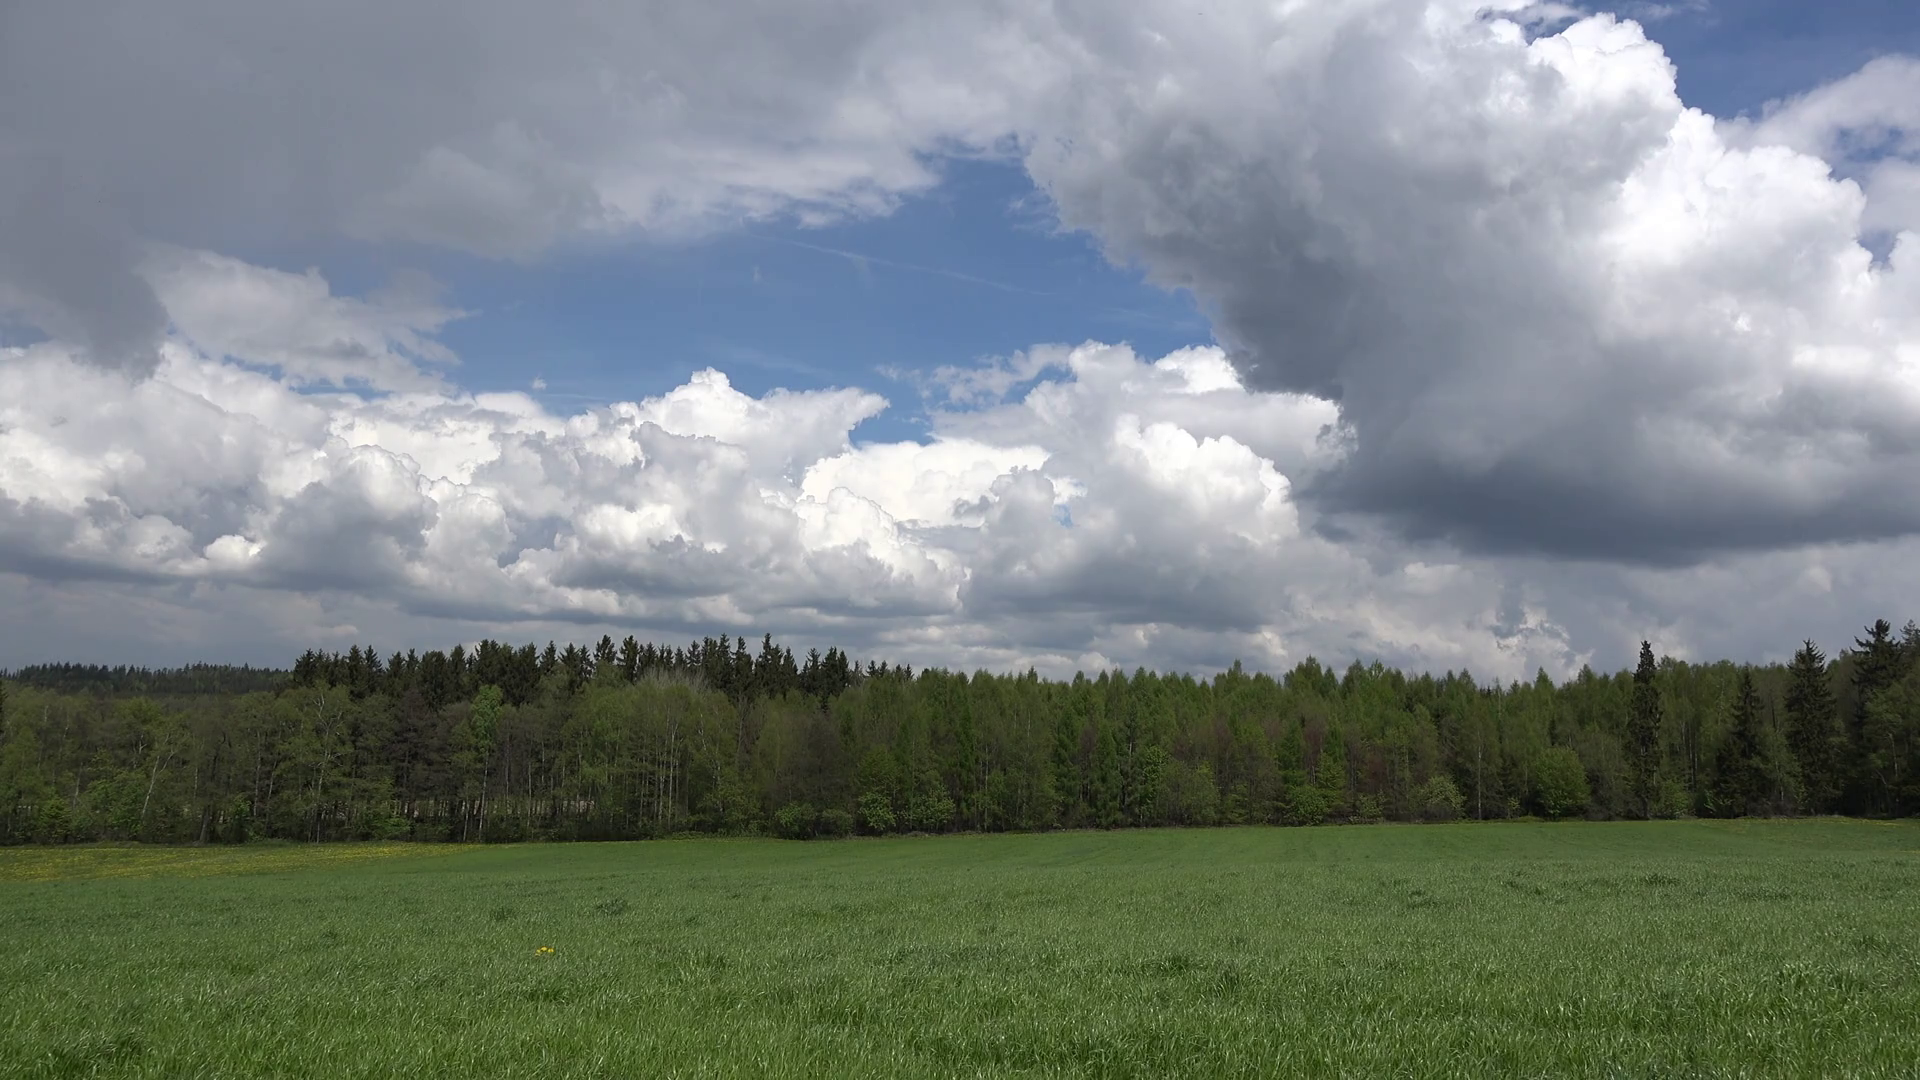 Germany Clouds Over Forest Zooms In Stock Video Footage - VideoBlocks